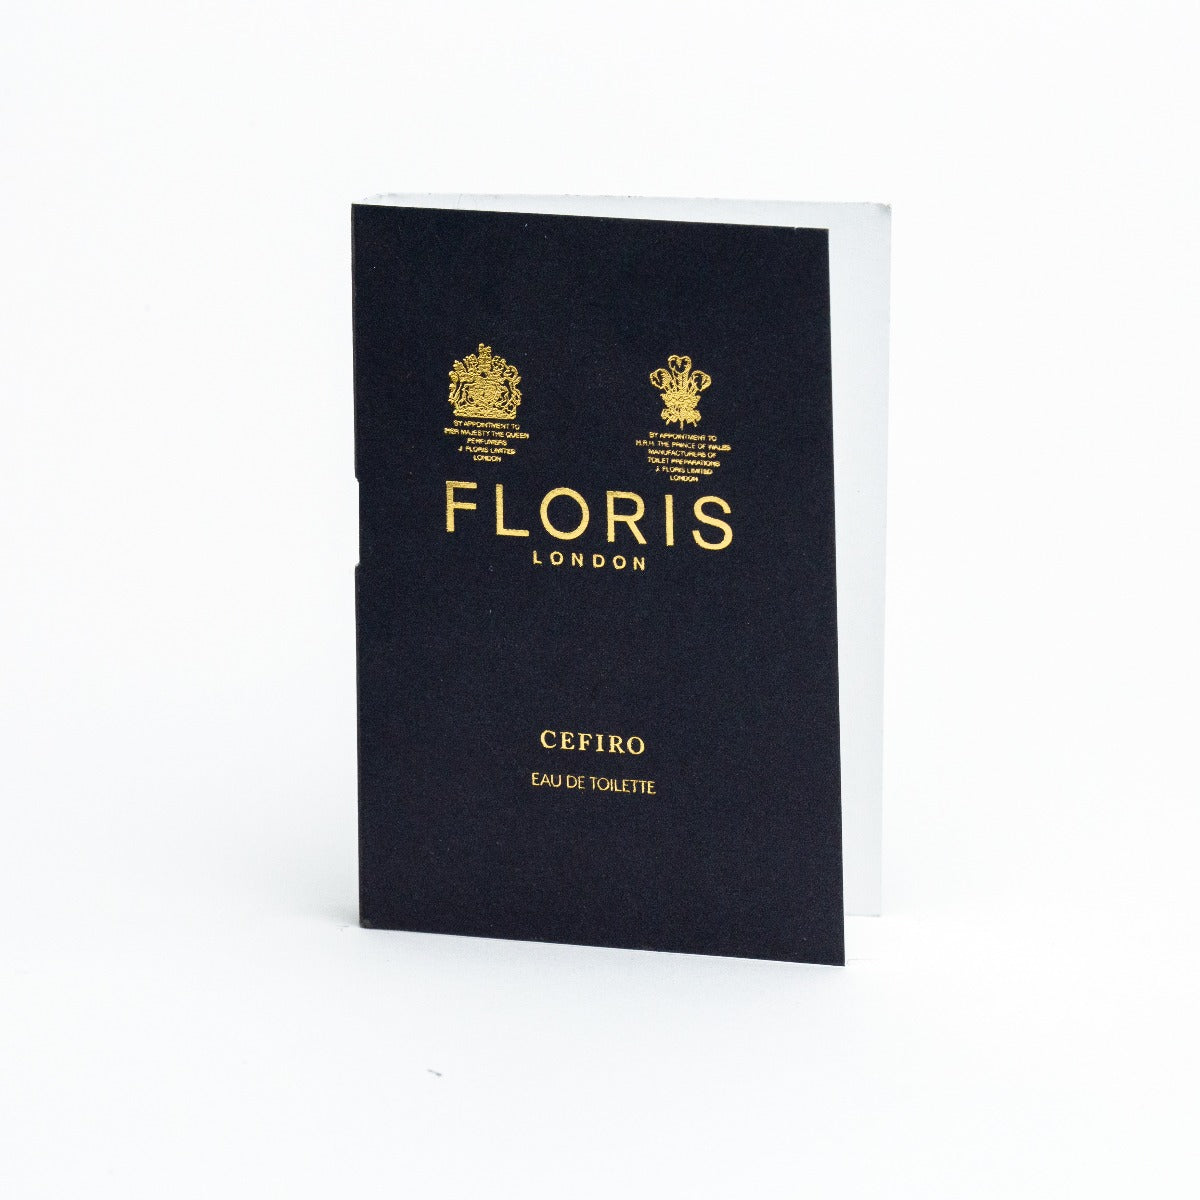 A black book with the logo of KirbyAllison.com on it that includes FLORIS Cefiro Sample Vials and a promo code.